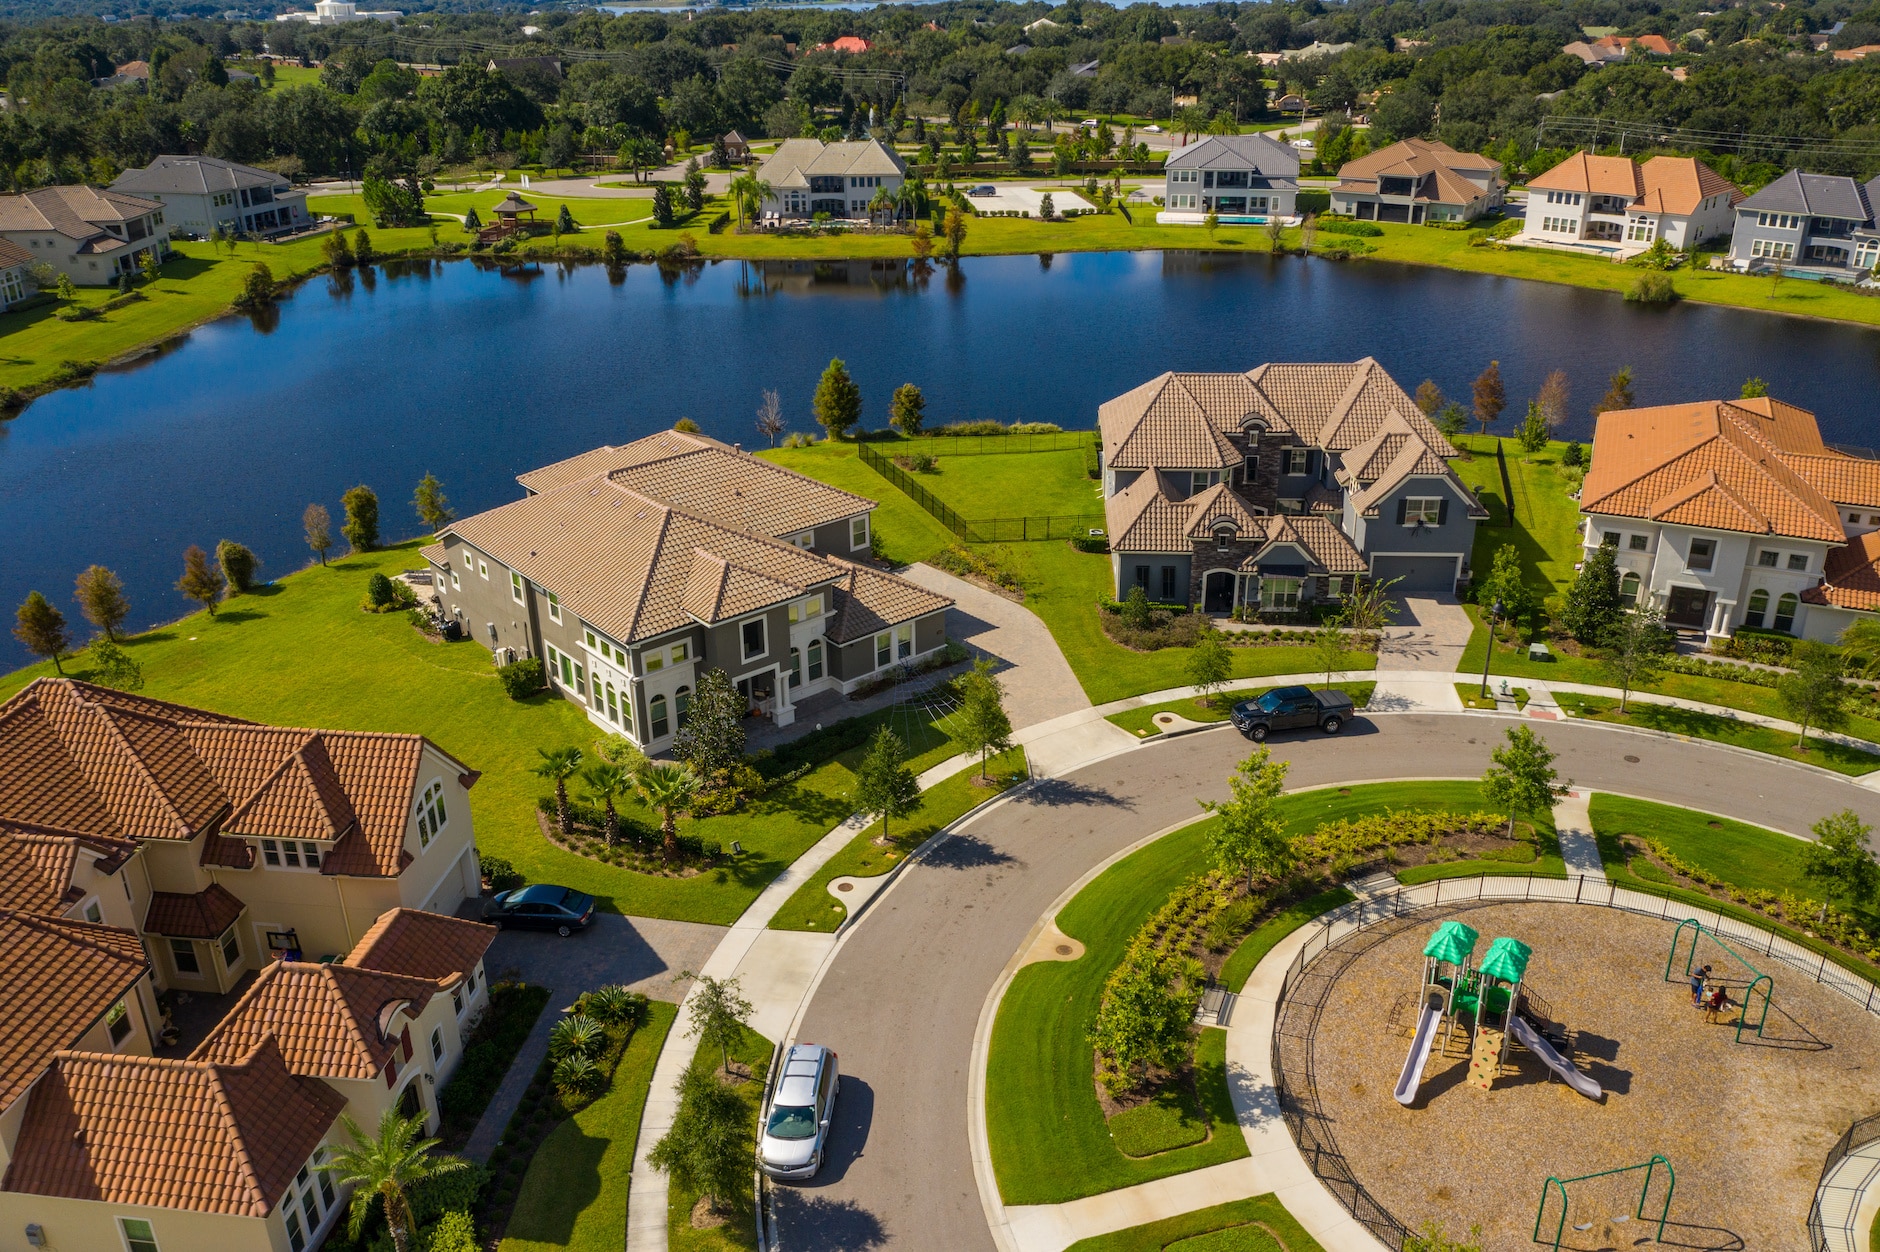 Florida lakeside project with luxury apartments, village market planned for  popular Orlando suburb of Clermont in Lake County - Orlando Business Journal